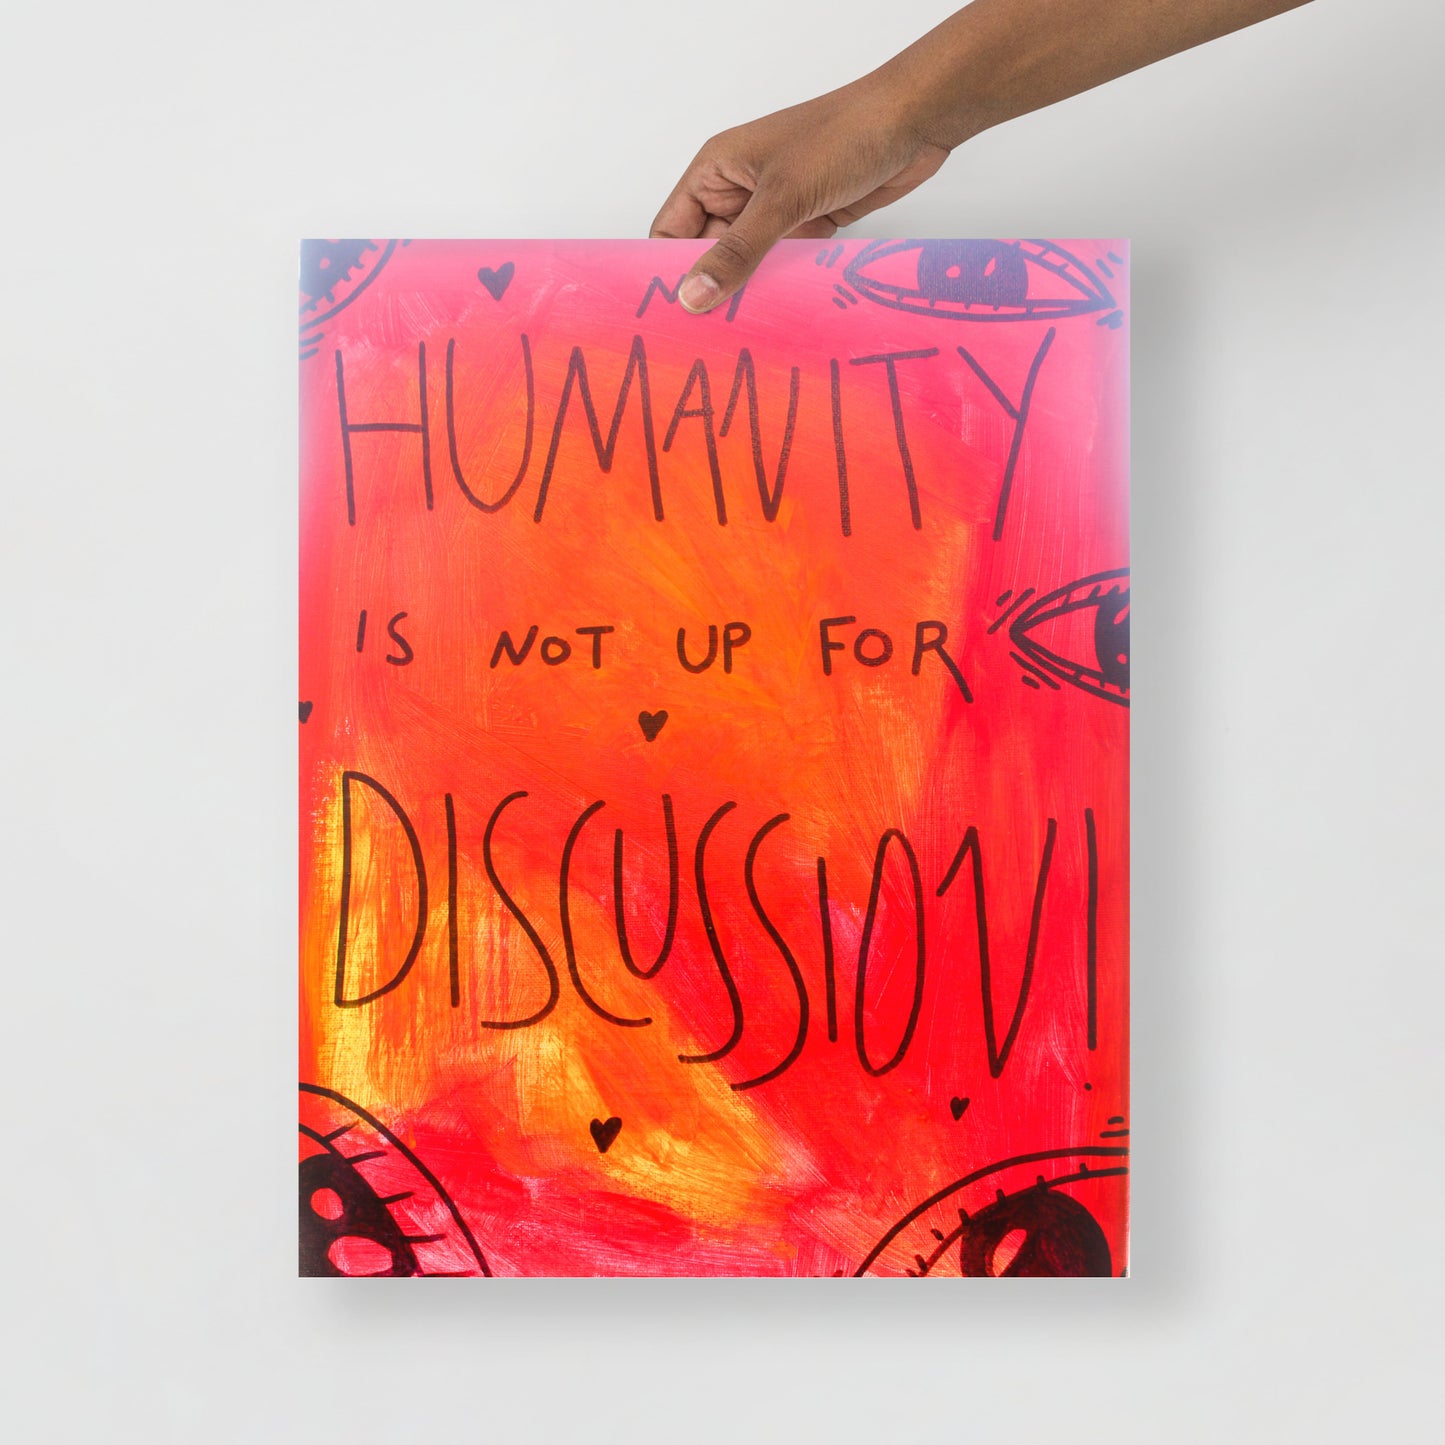 My humanity is not up for discussion print